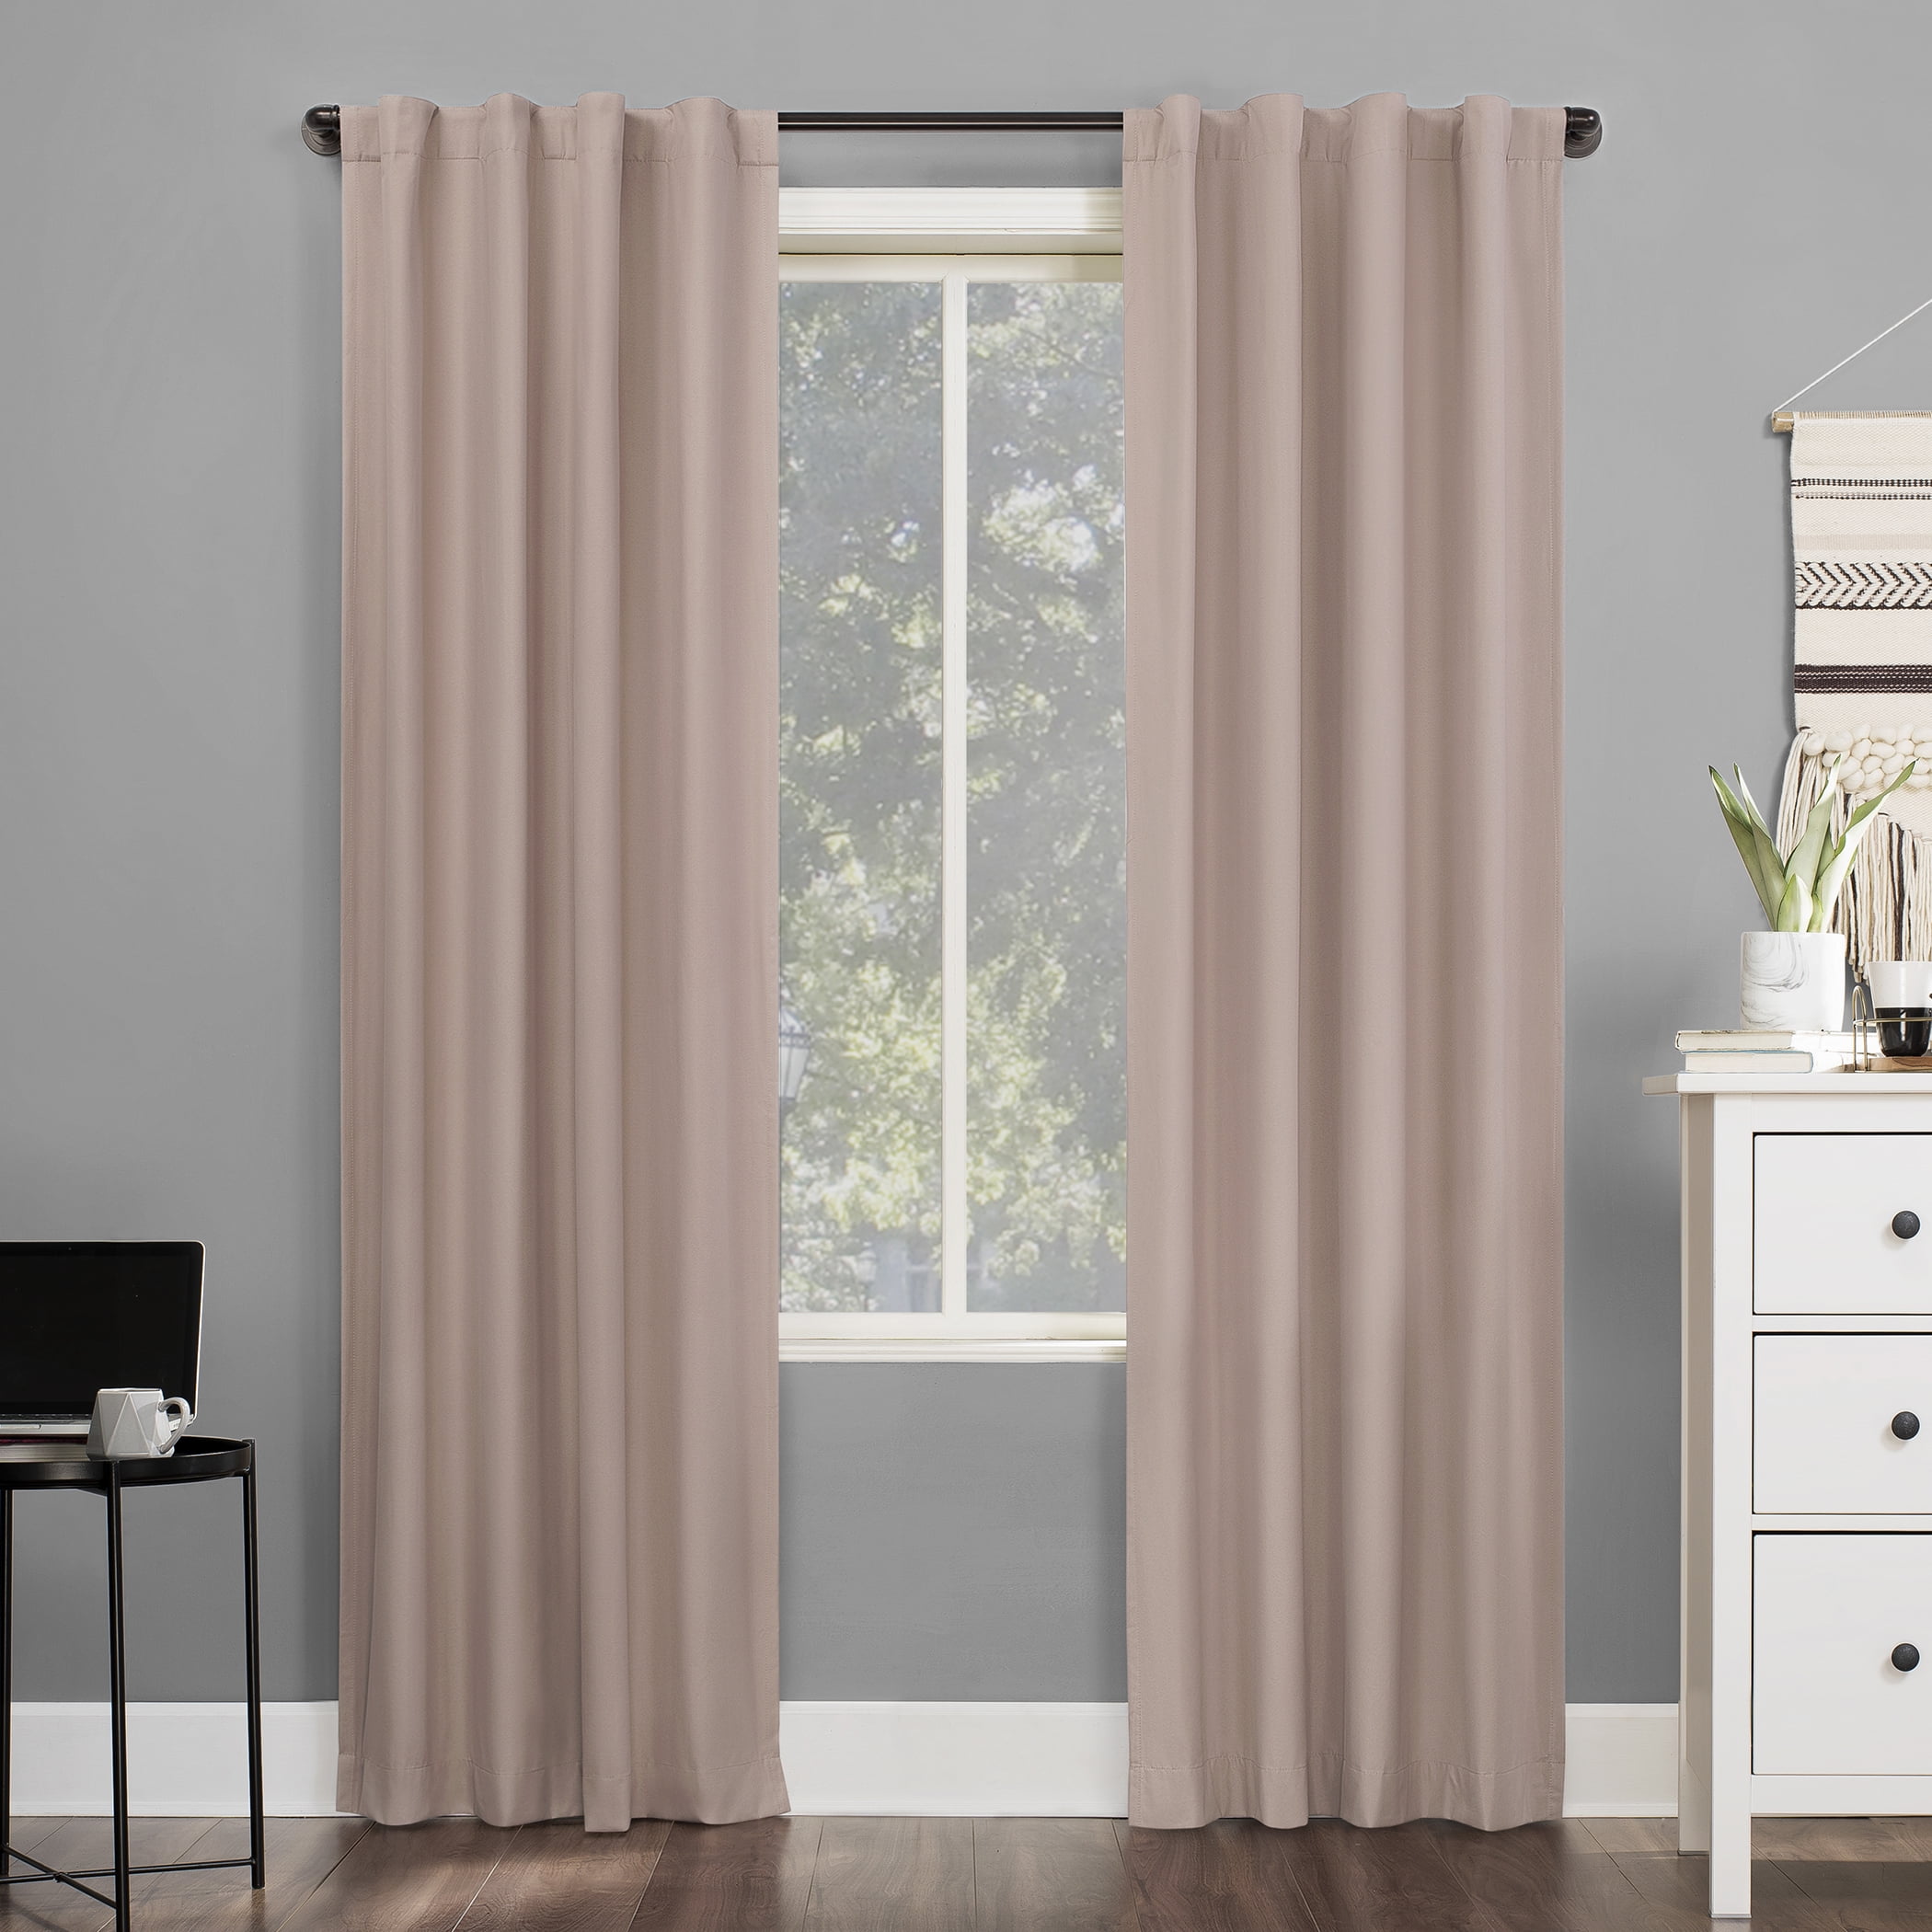 NEW LIGHT REDUCING PLAIN SEMI BLOCK OUT THERMAL BACKED LINED PAIR OF CURTAINS 